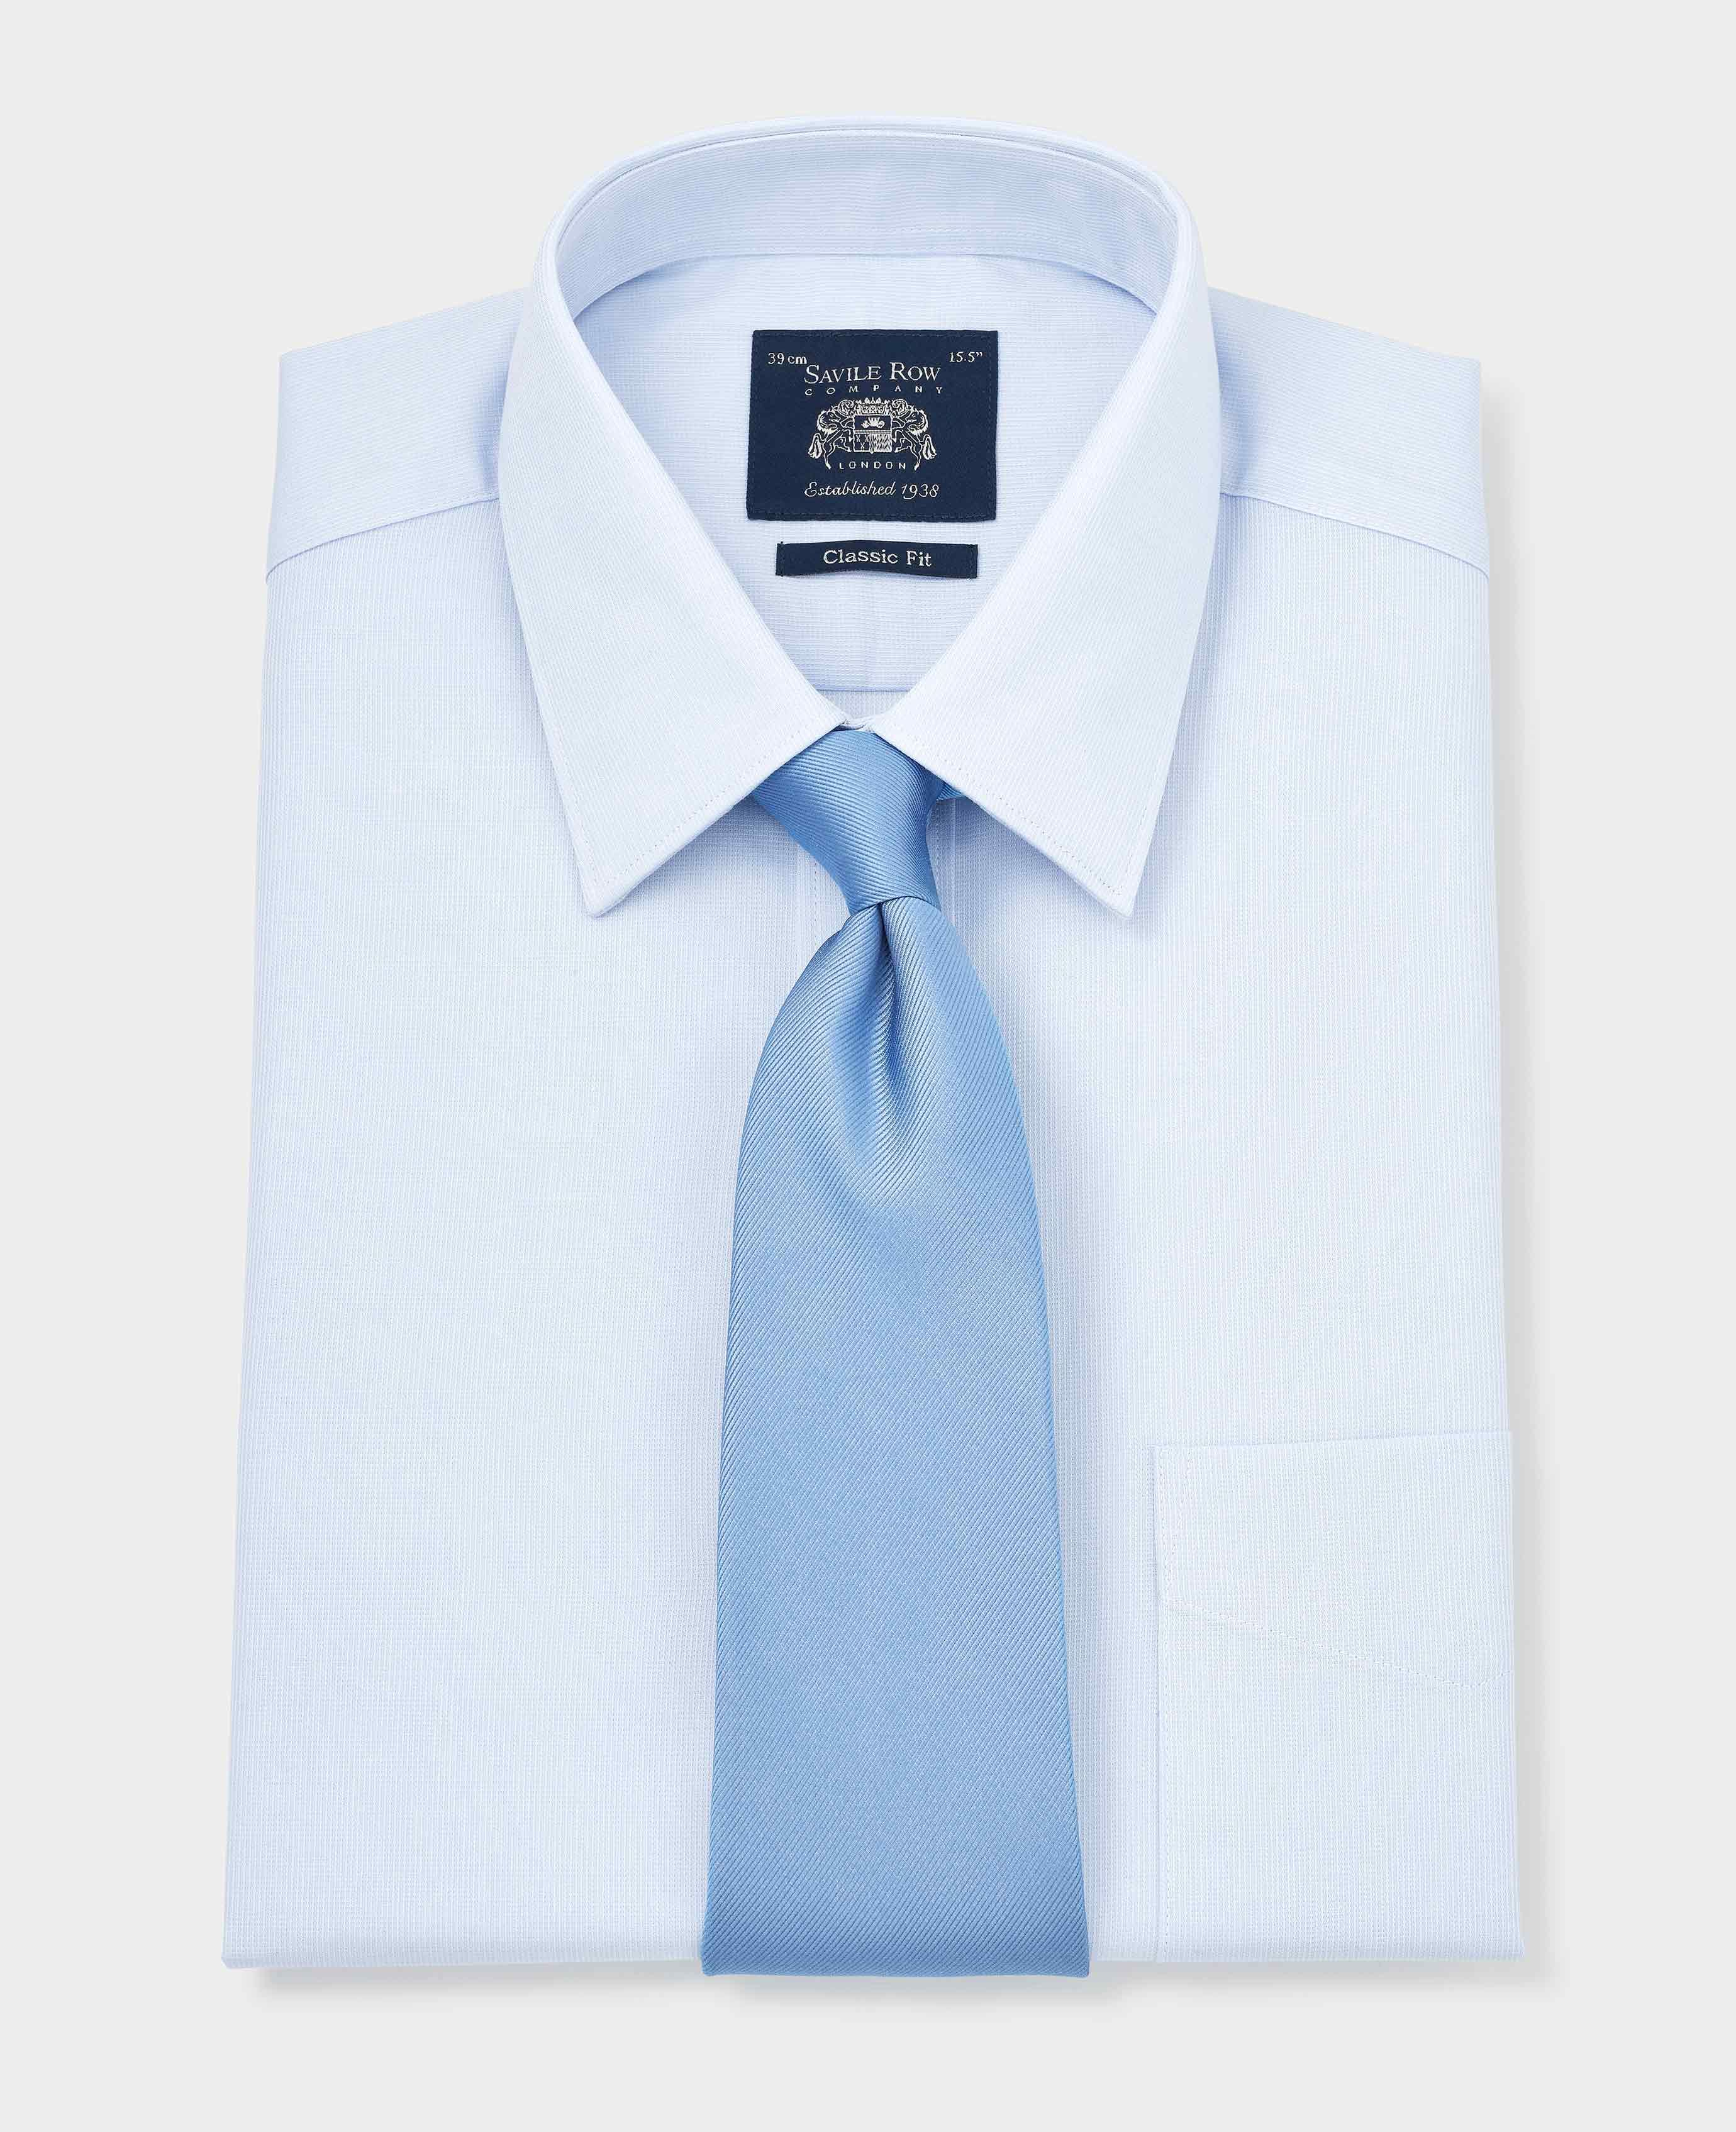 Men's Sky Blue Classic Fit Formal Shirt With Single Cuffs | Savile Row Co